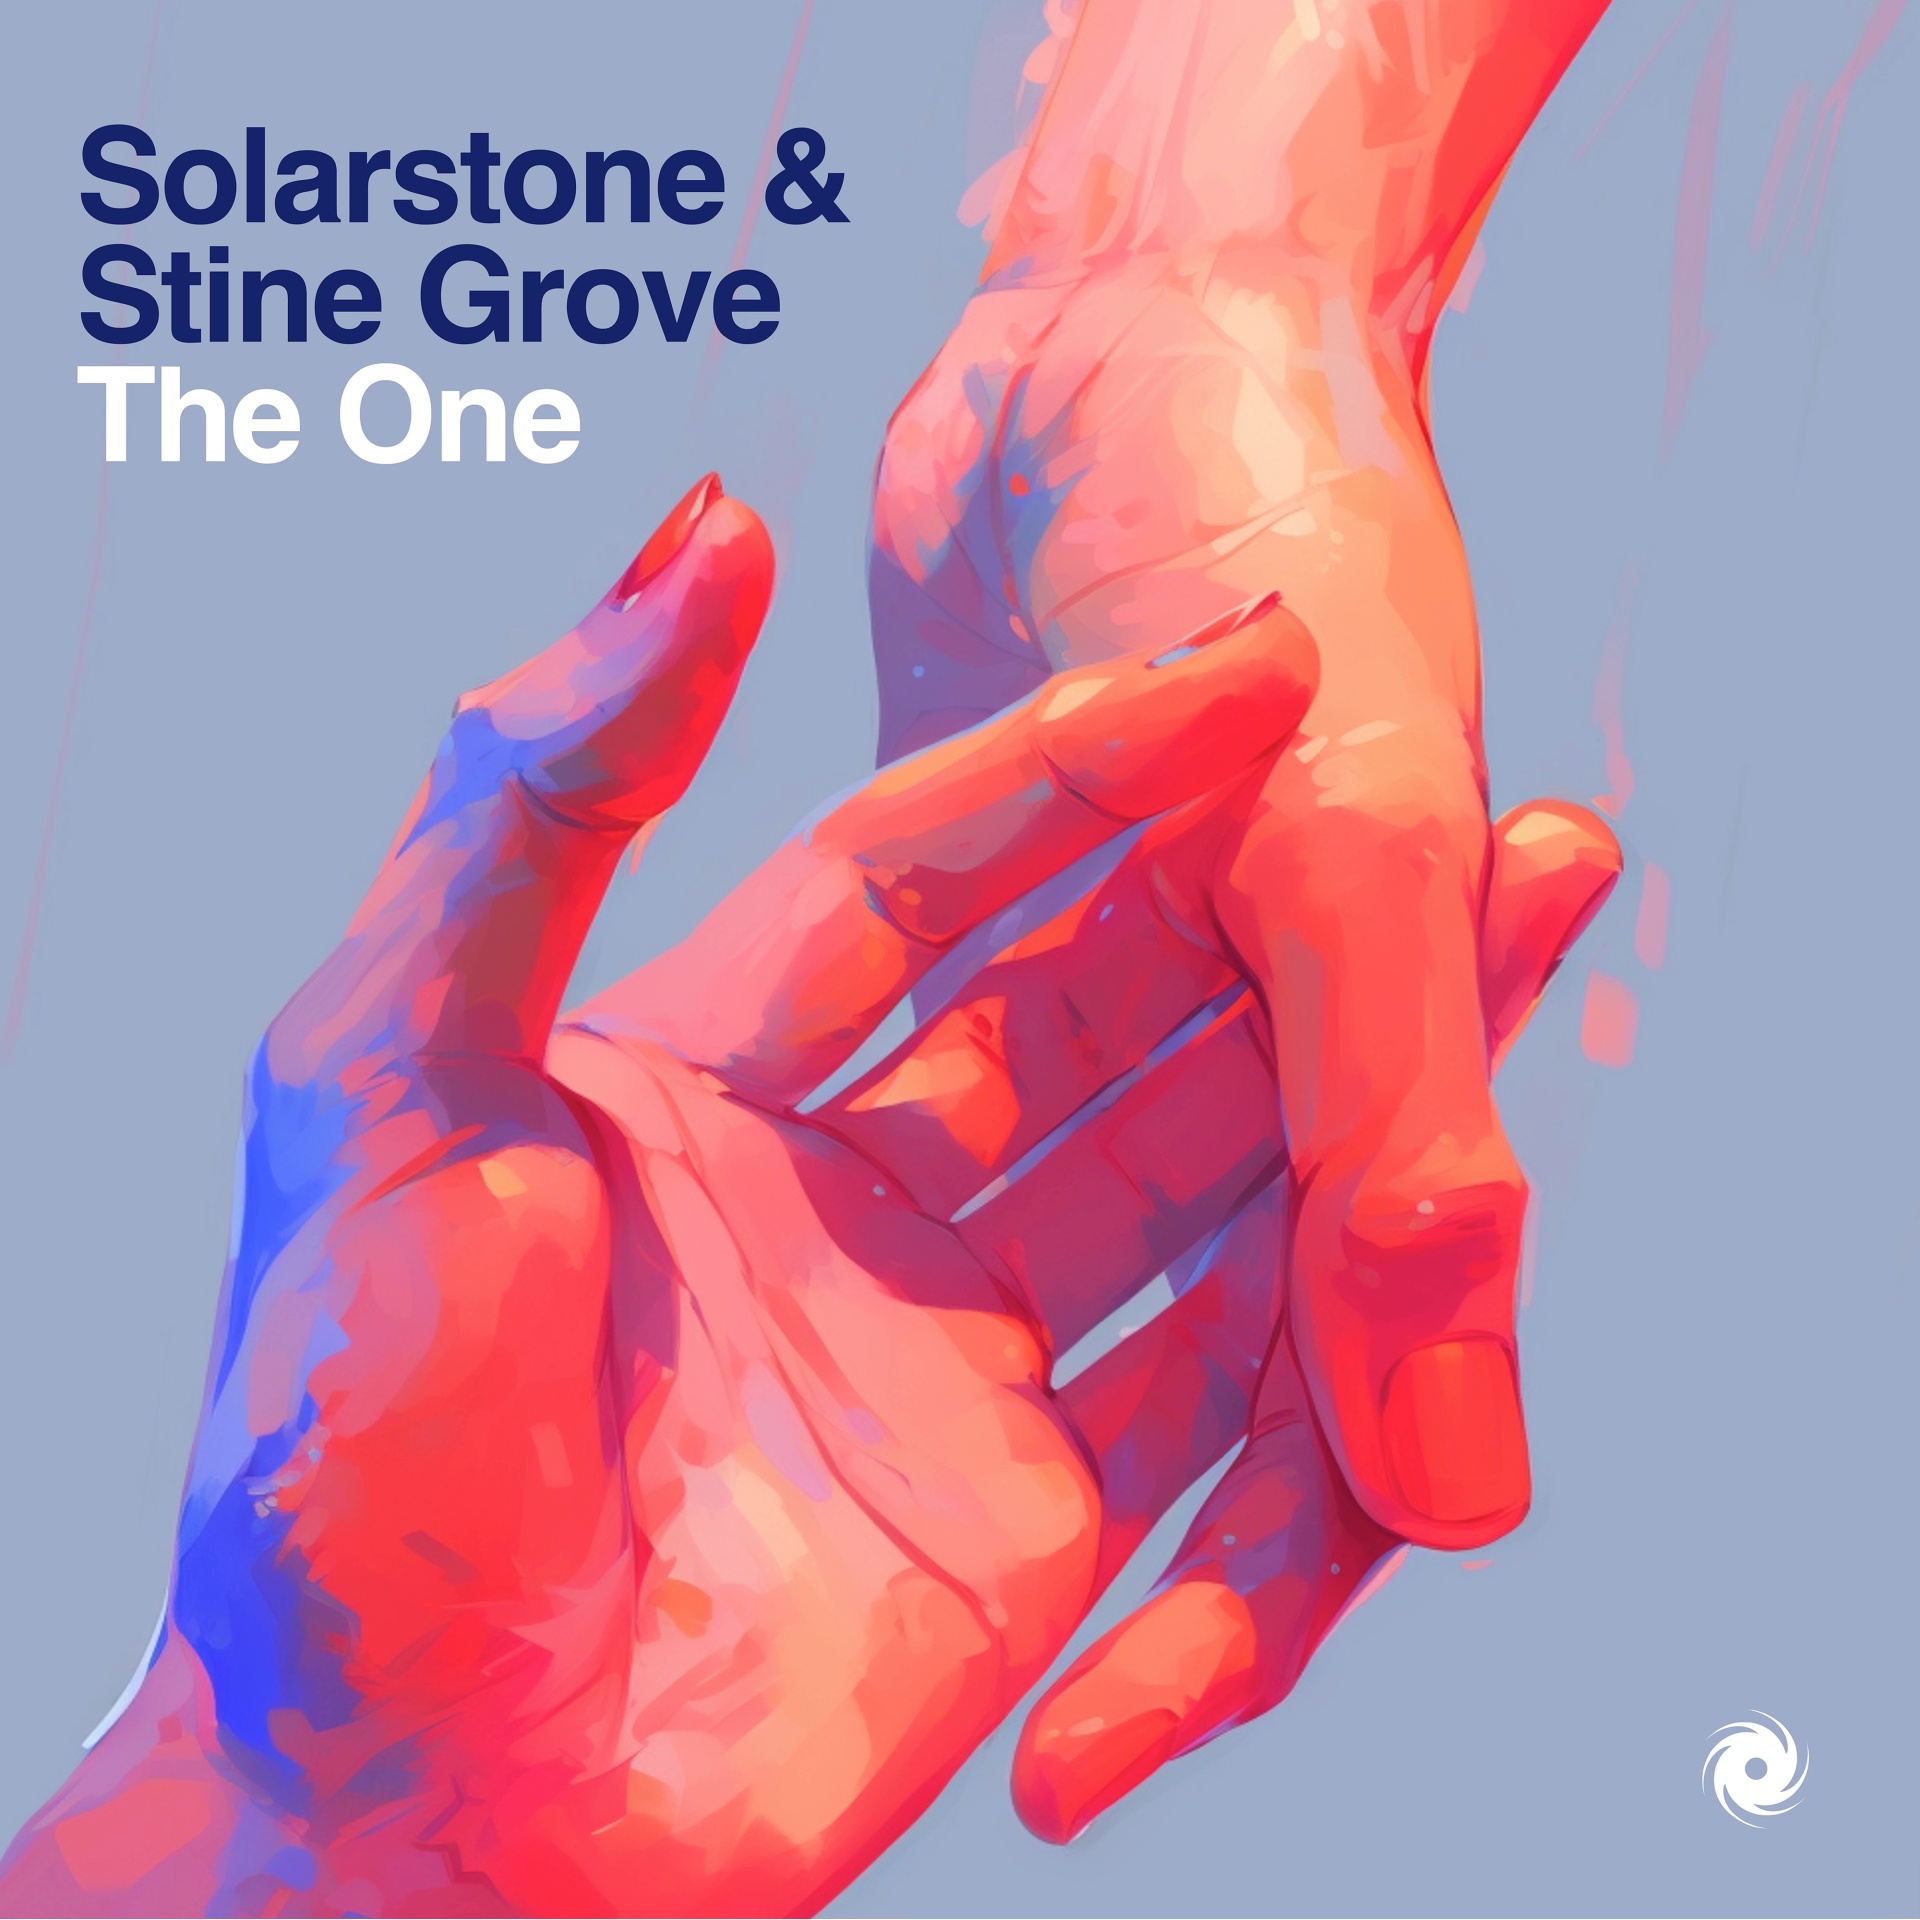 Solarstone and Stine Grove presents The One on Black Hole Recordings